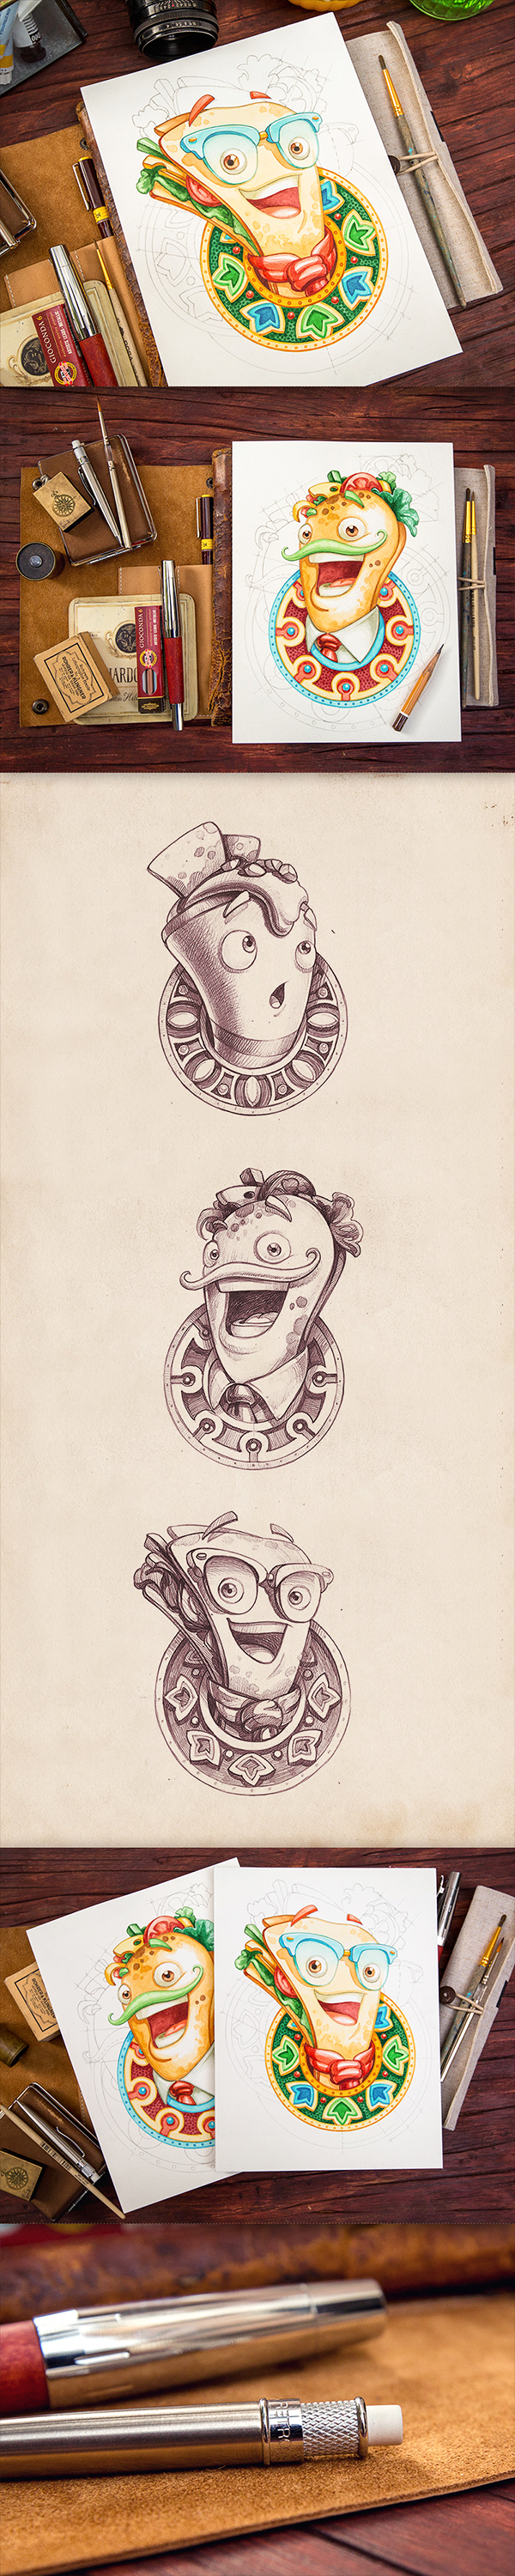 ios game iphone sketch Character UI design match3 Interface smile STEAMPUNK metal SKY arcade